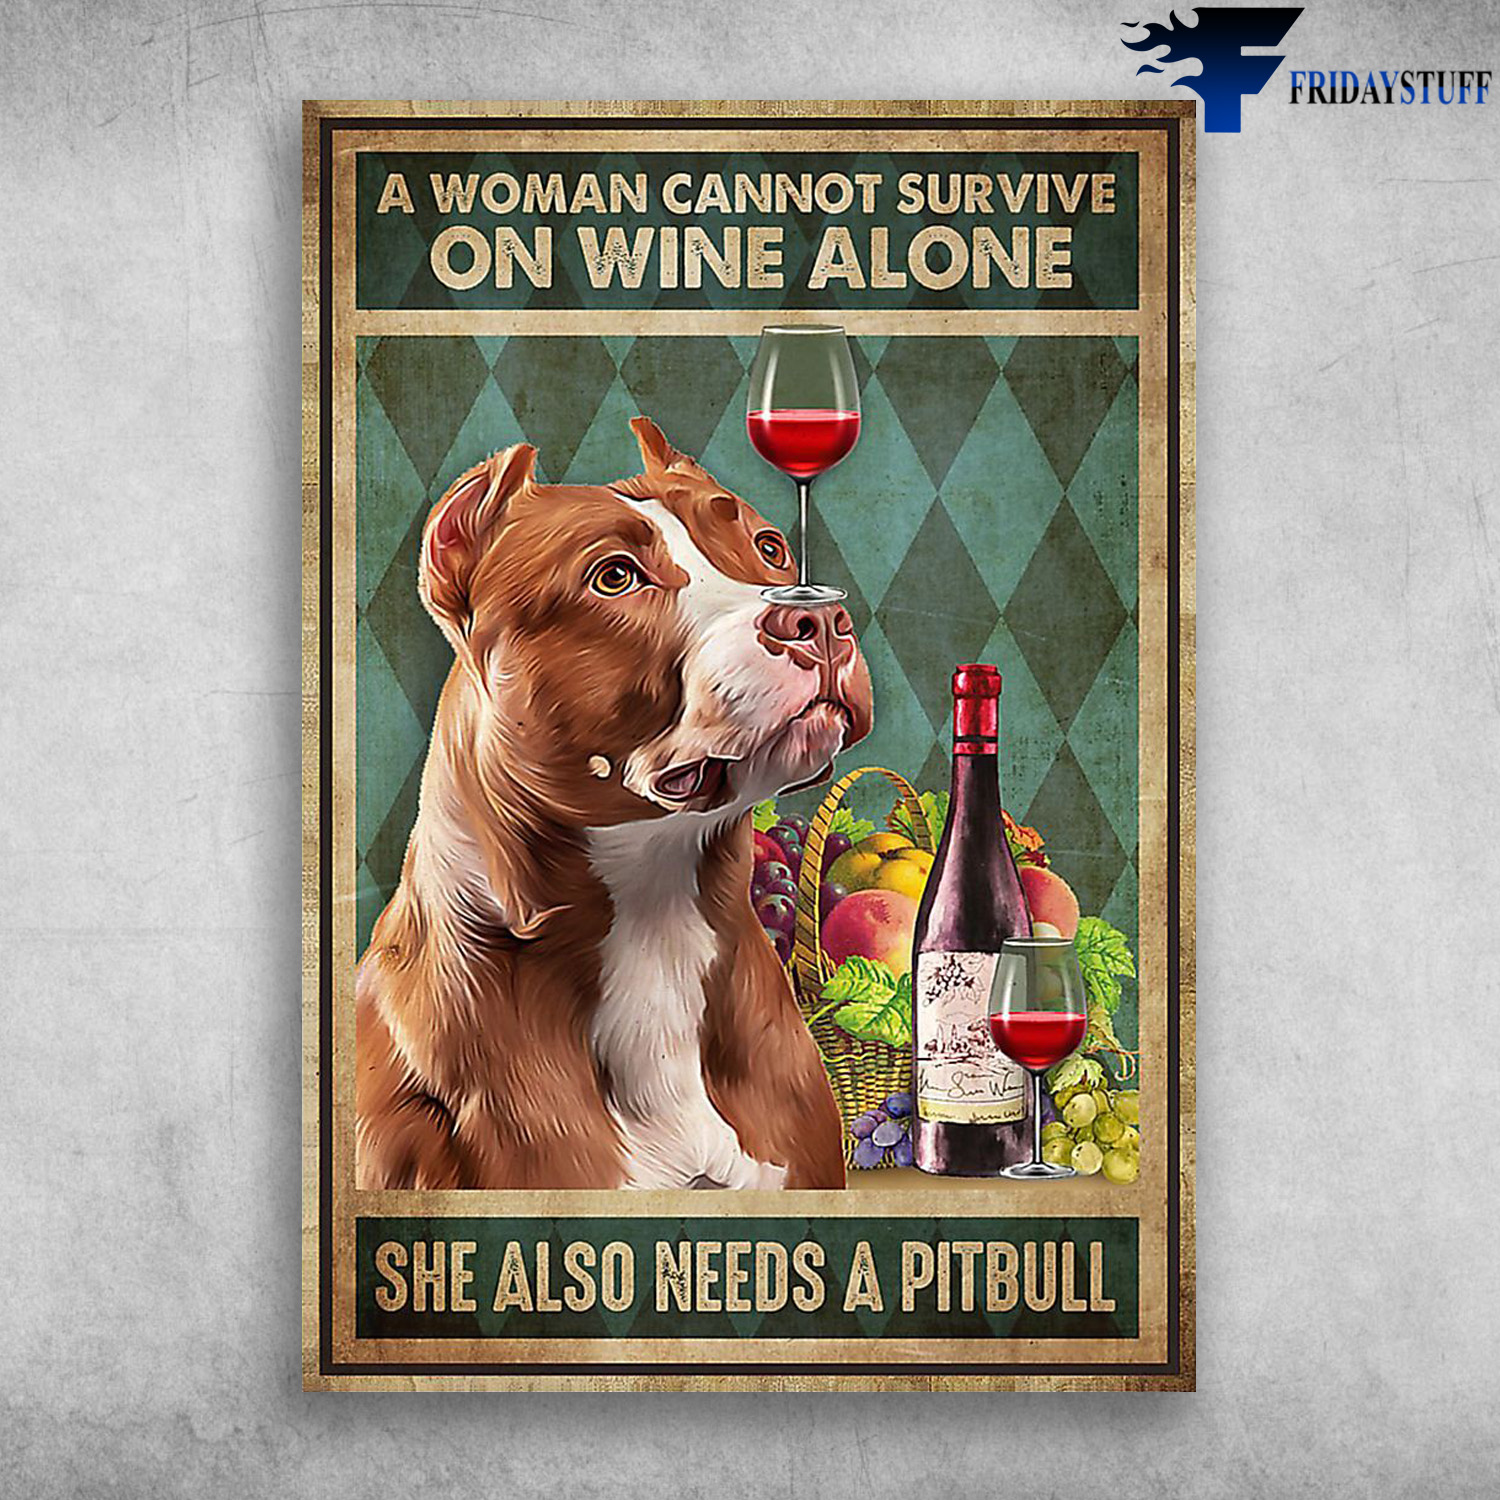 Pitbull And Wine - A Woman Cannot Survive On Wine Alone, She Also Needs A Pitbull